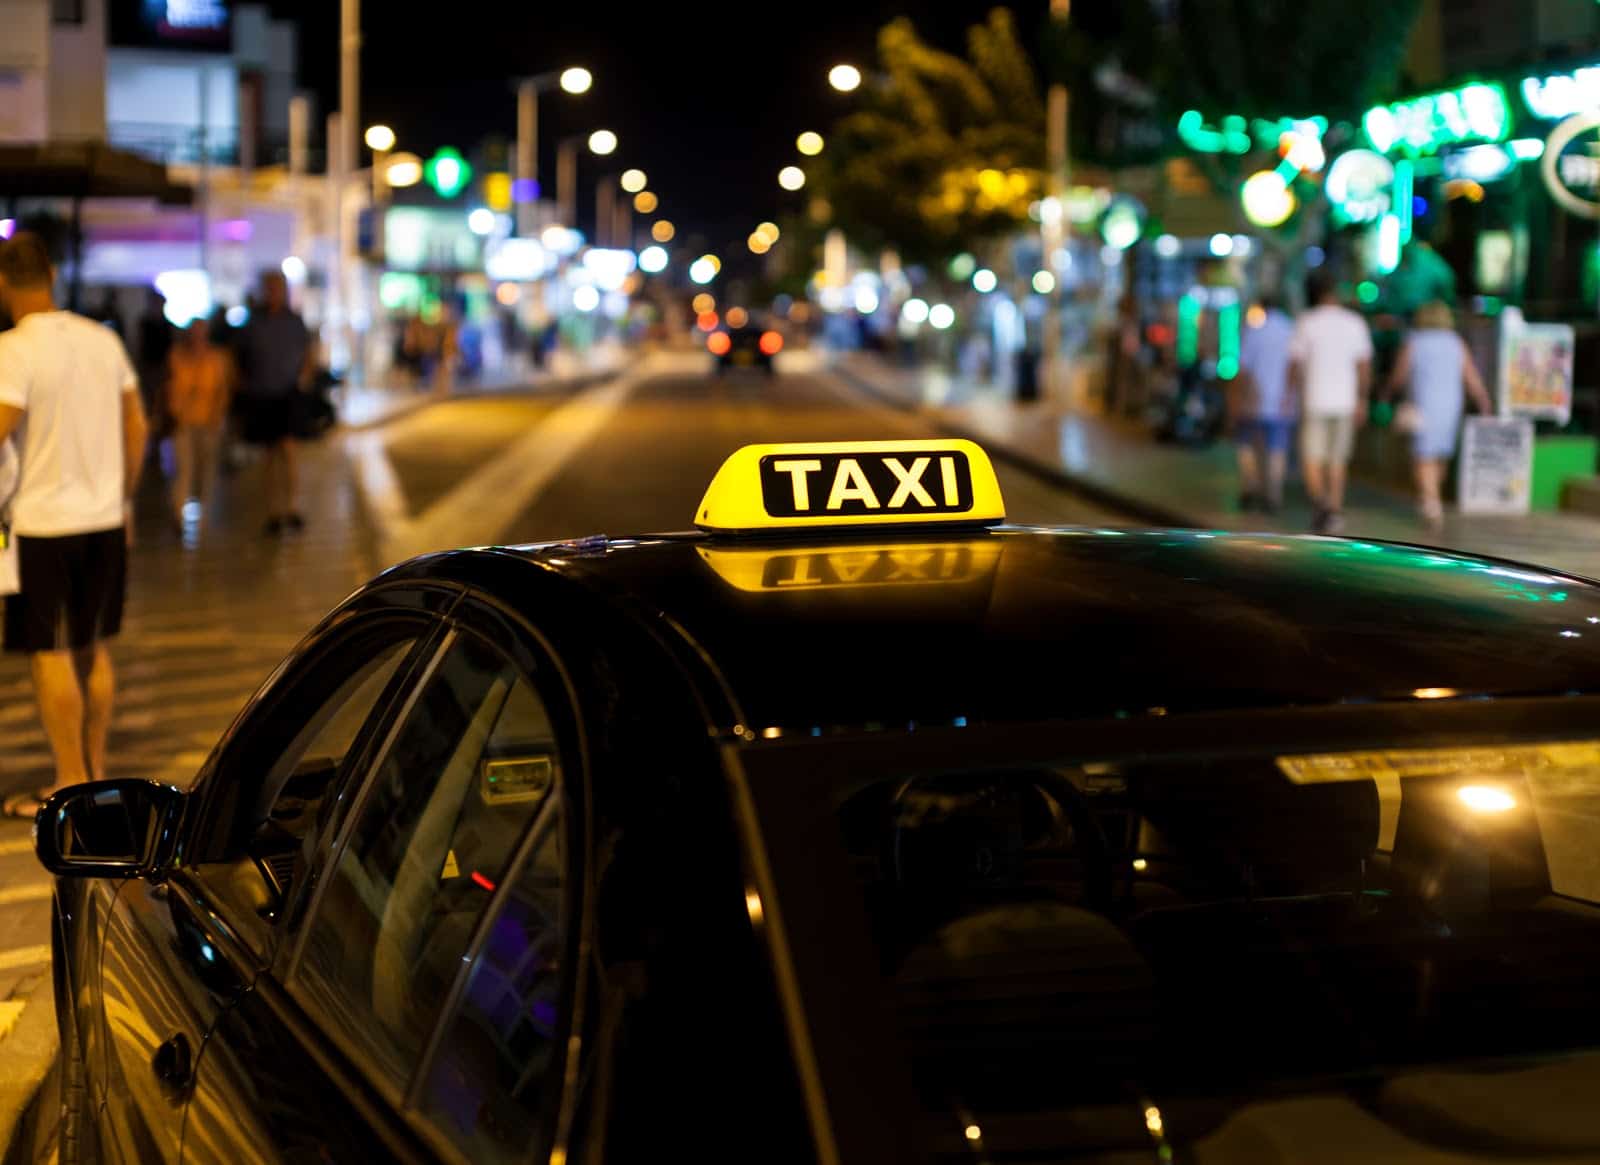 Curb promo code: a taxi in a busy downtown area